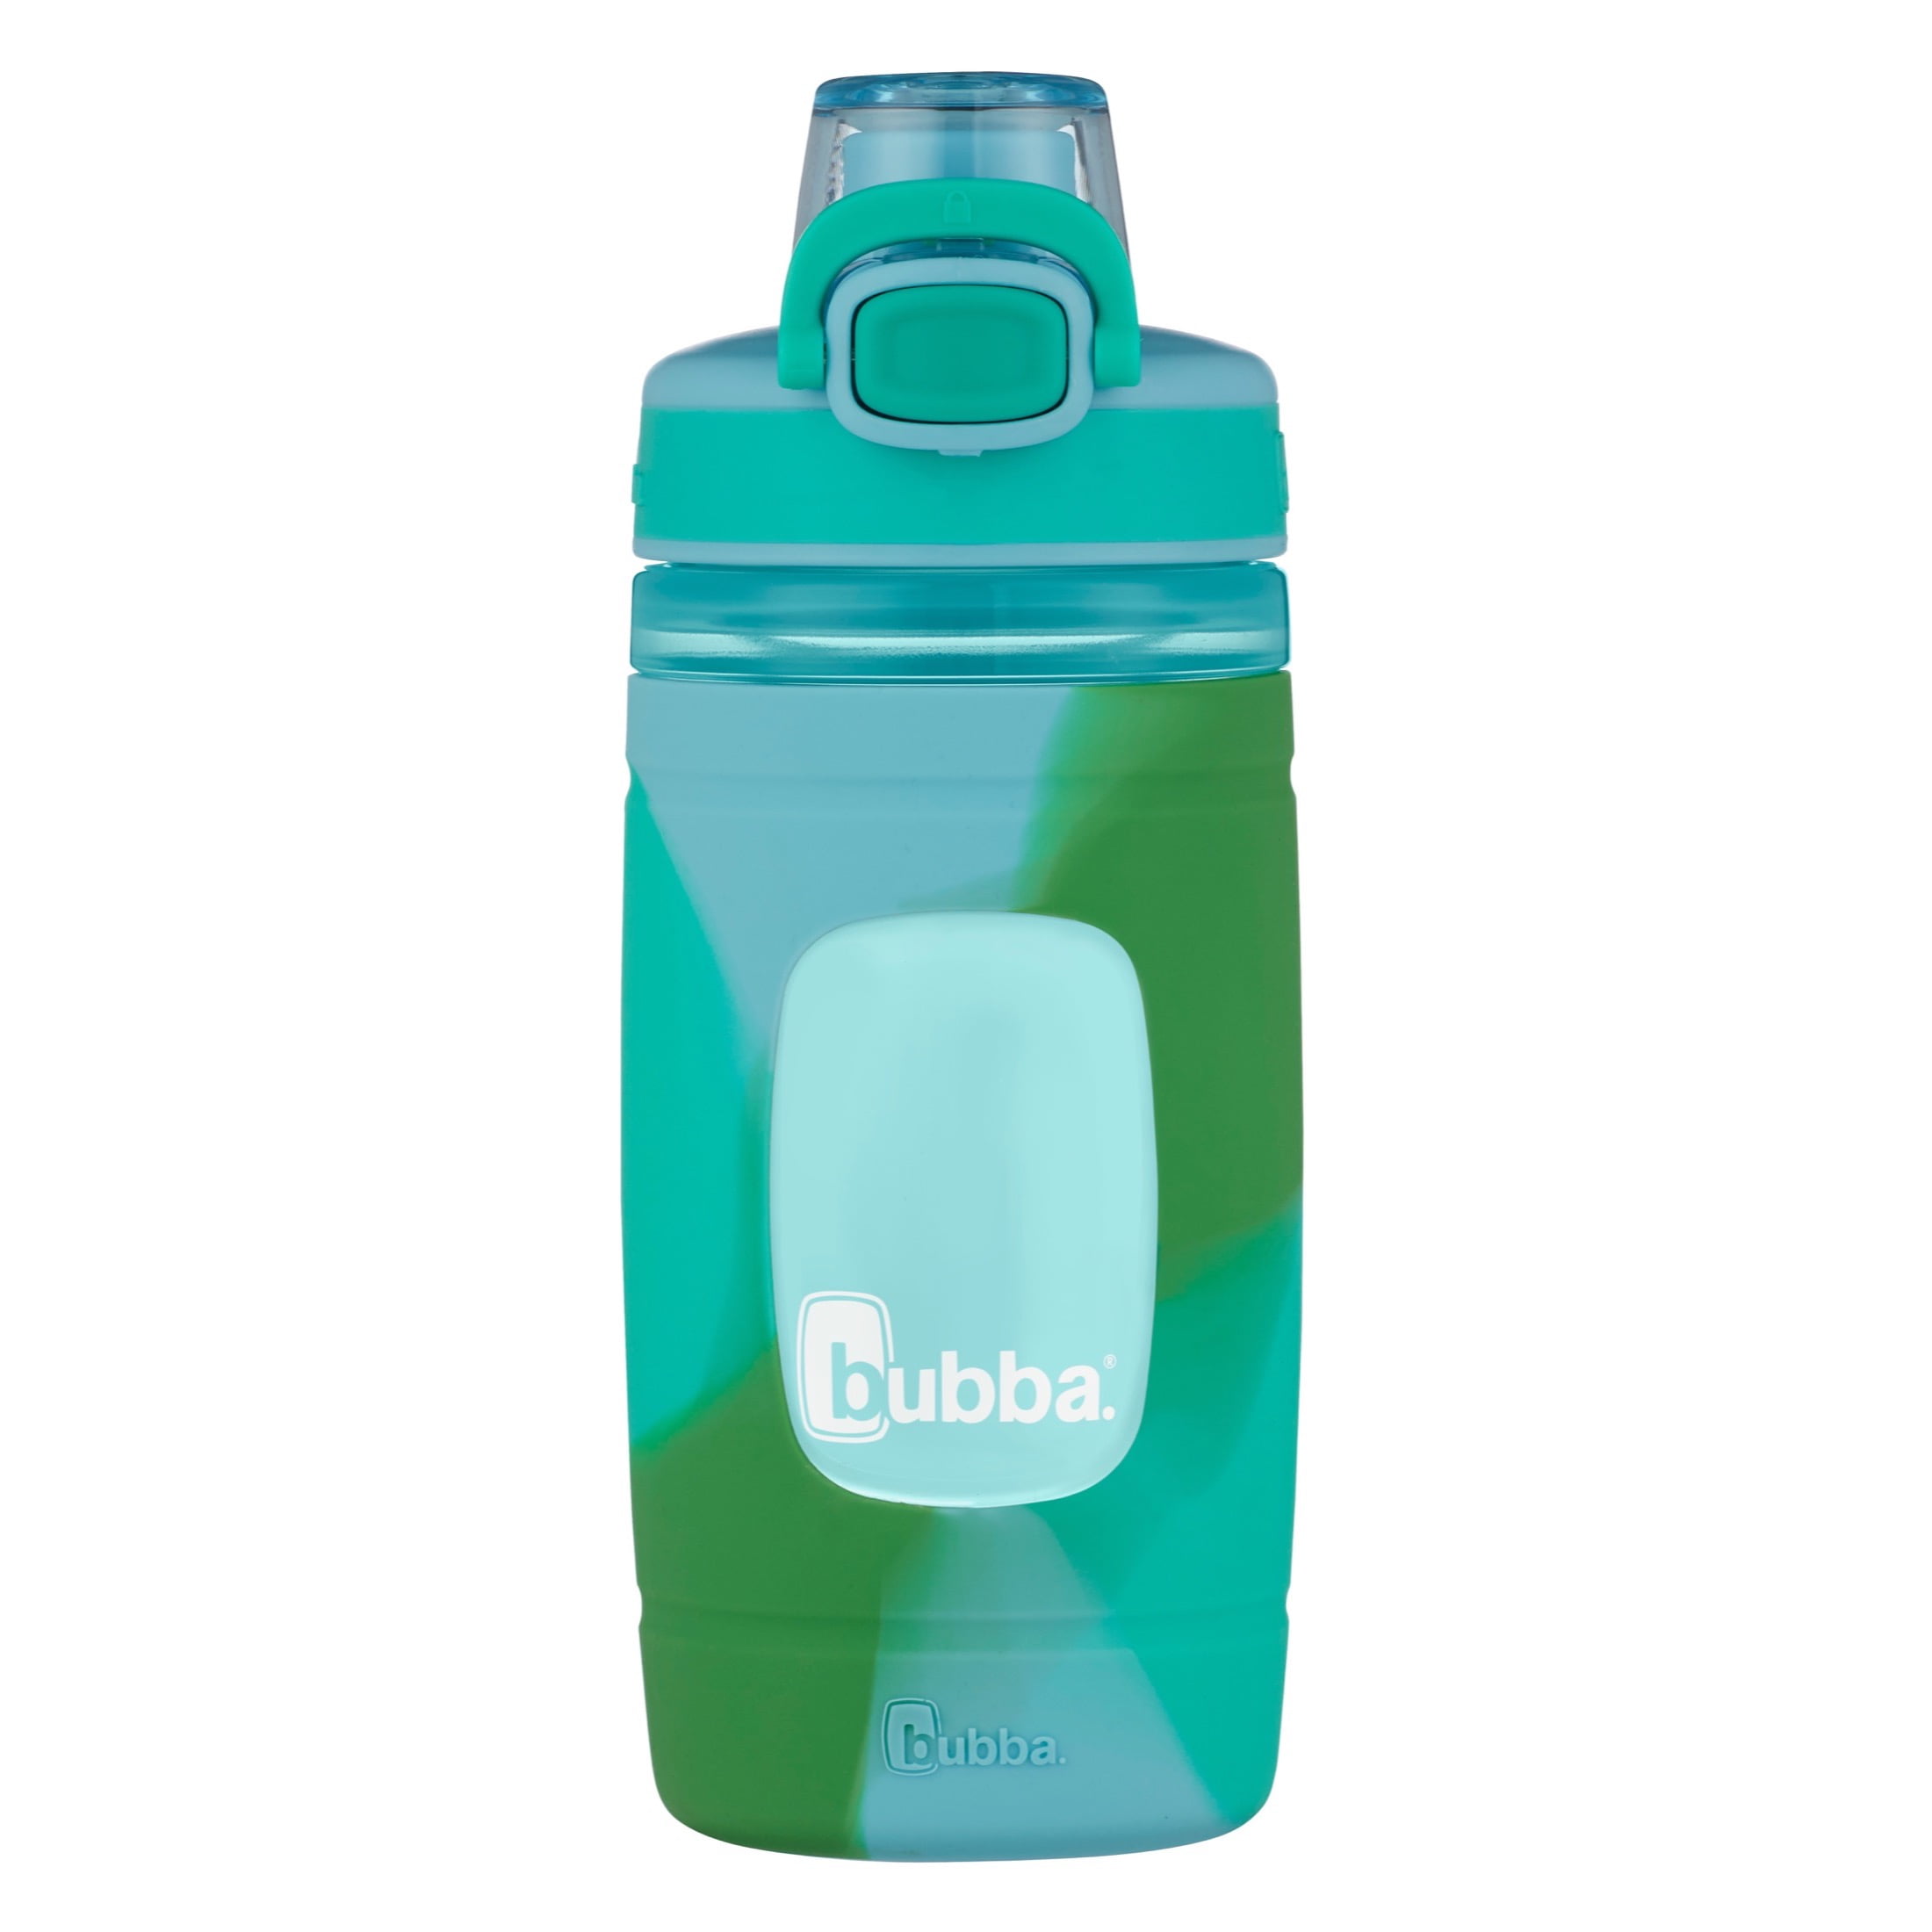 bubba Flo Kids 16 oz Teal and Green Plastic Water Bottle with Wide Mouth Lid